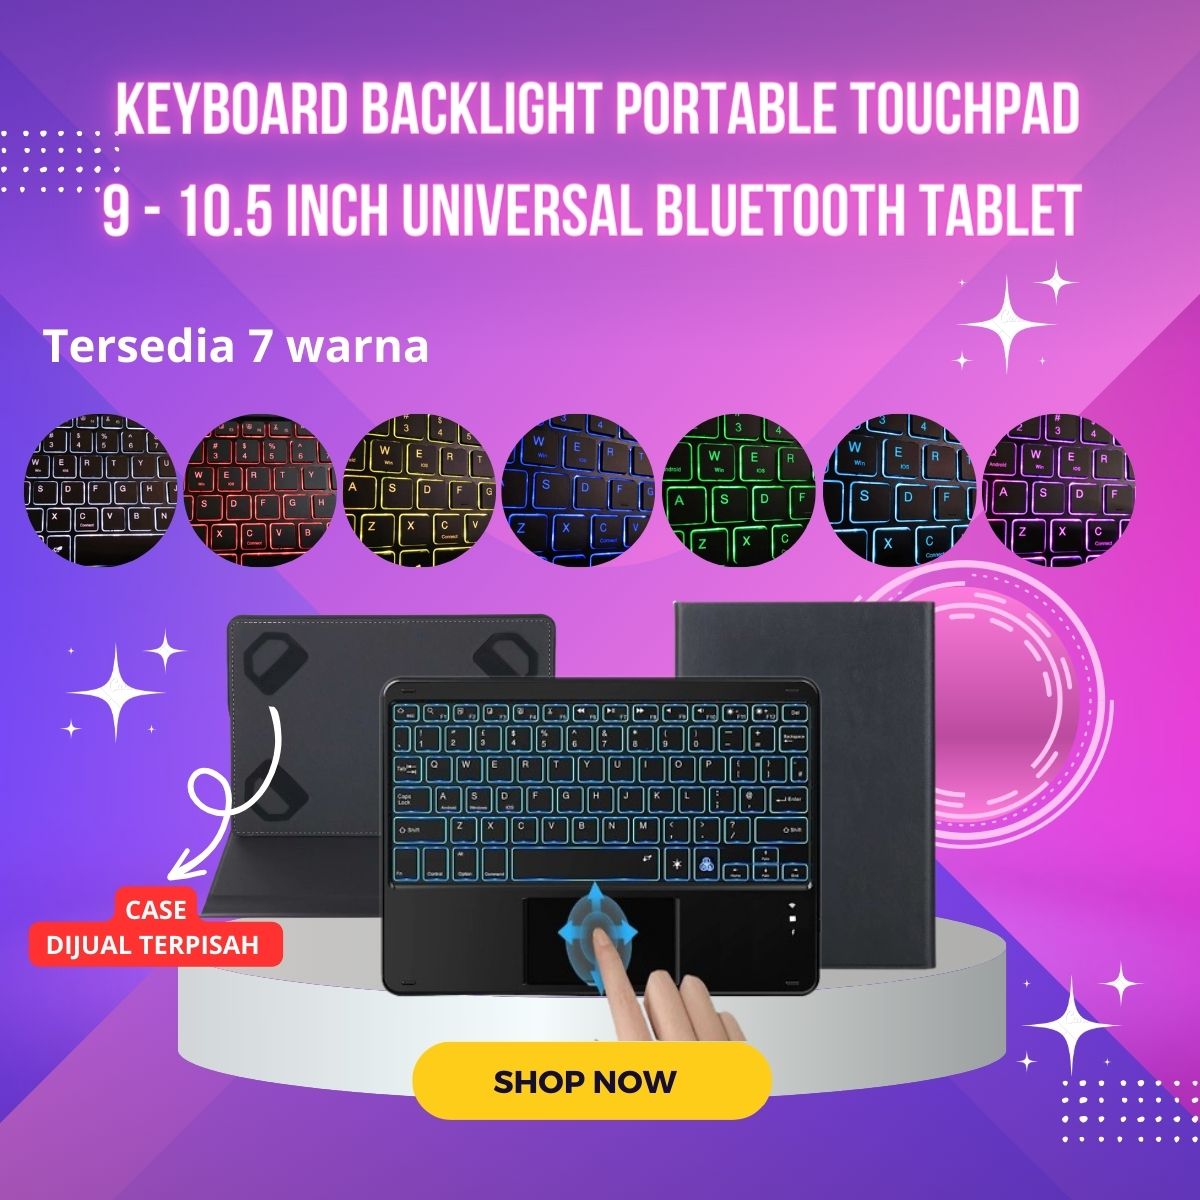 KYB-028 Keyboard Backlight Portable Touchpad 9 - 10.5 INCH Universal Bluetooth Tablet for Windows Smartphone Samsung Huawei Android IOS Ipad Wireless